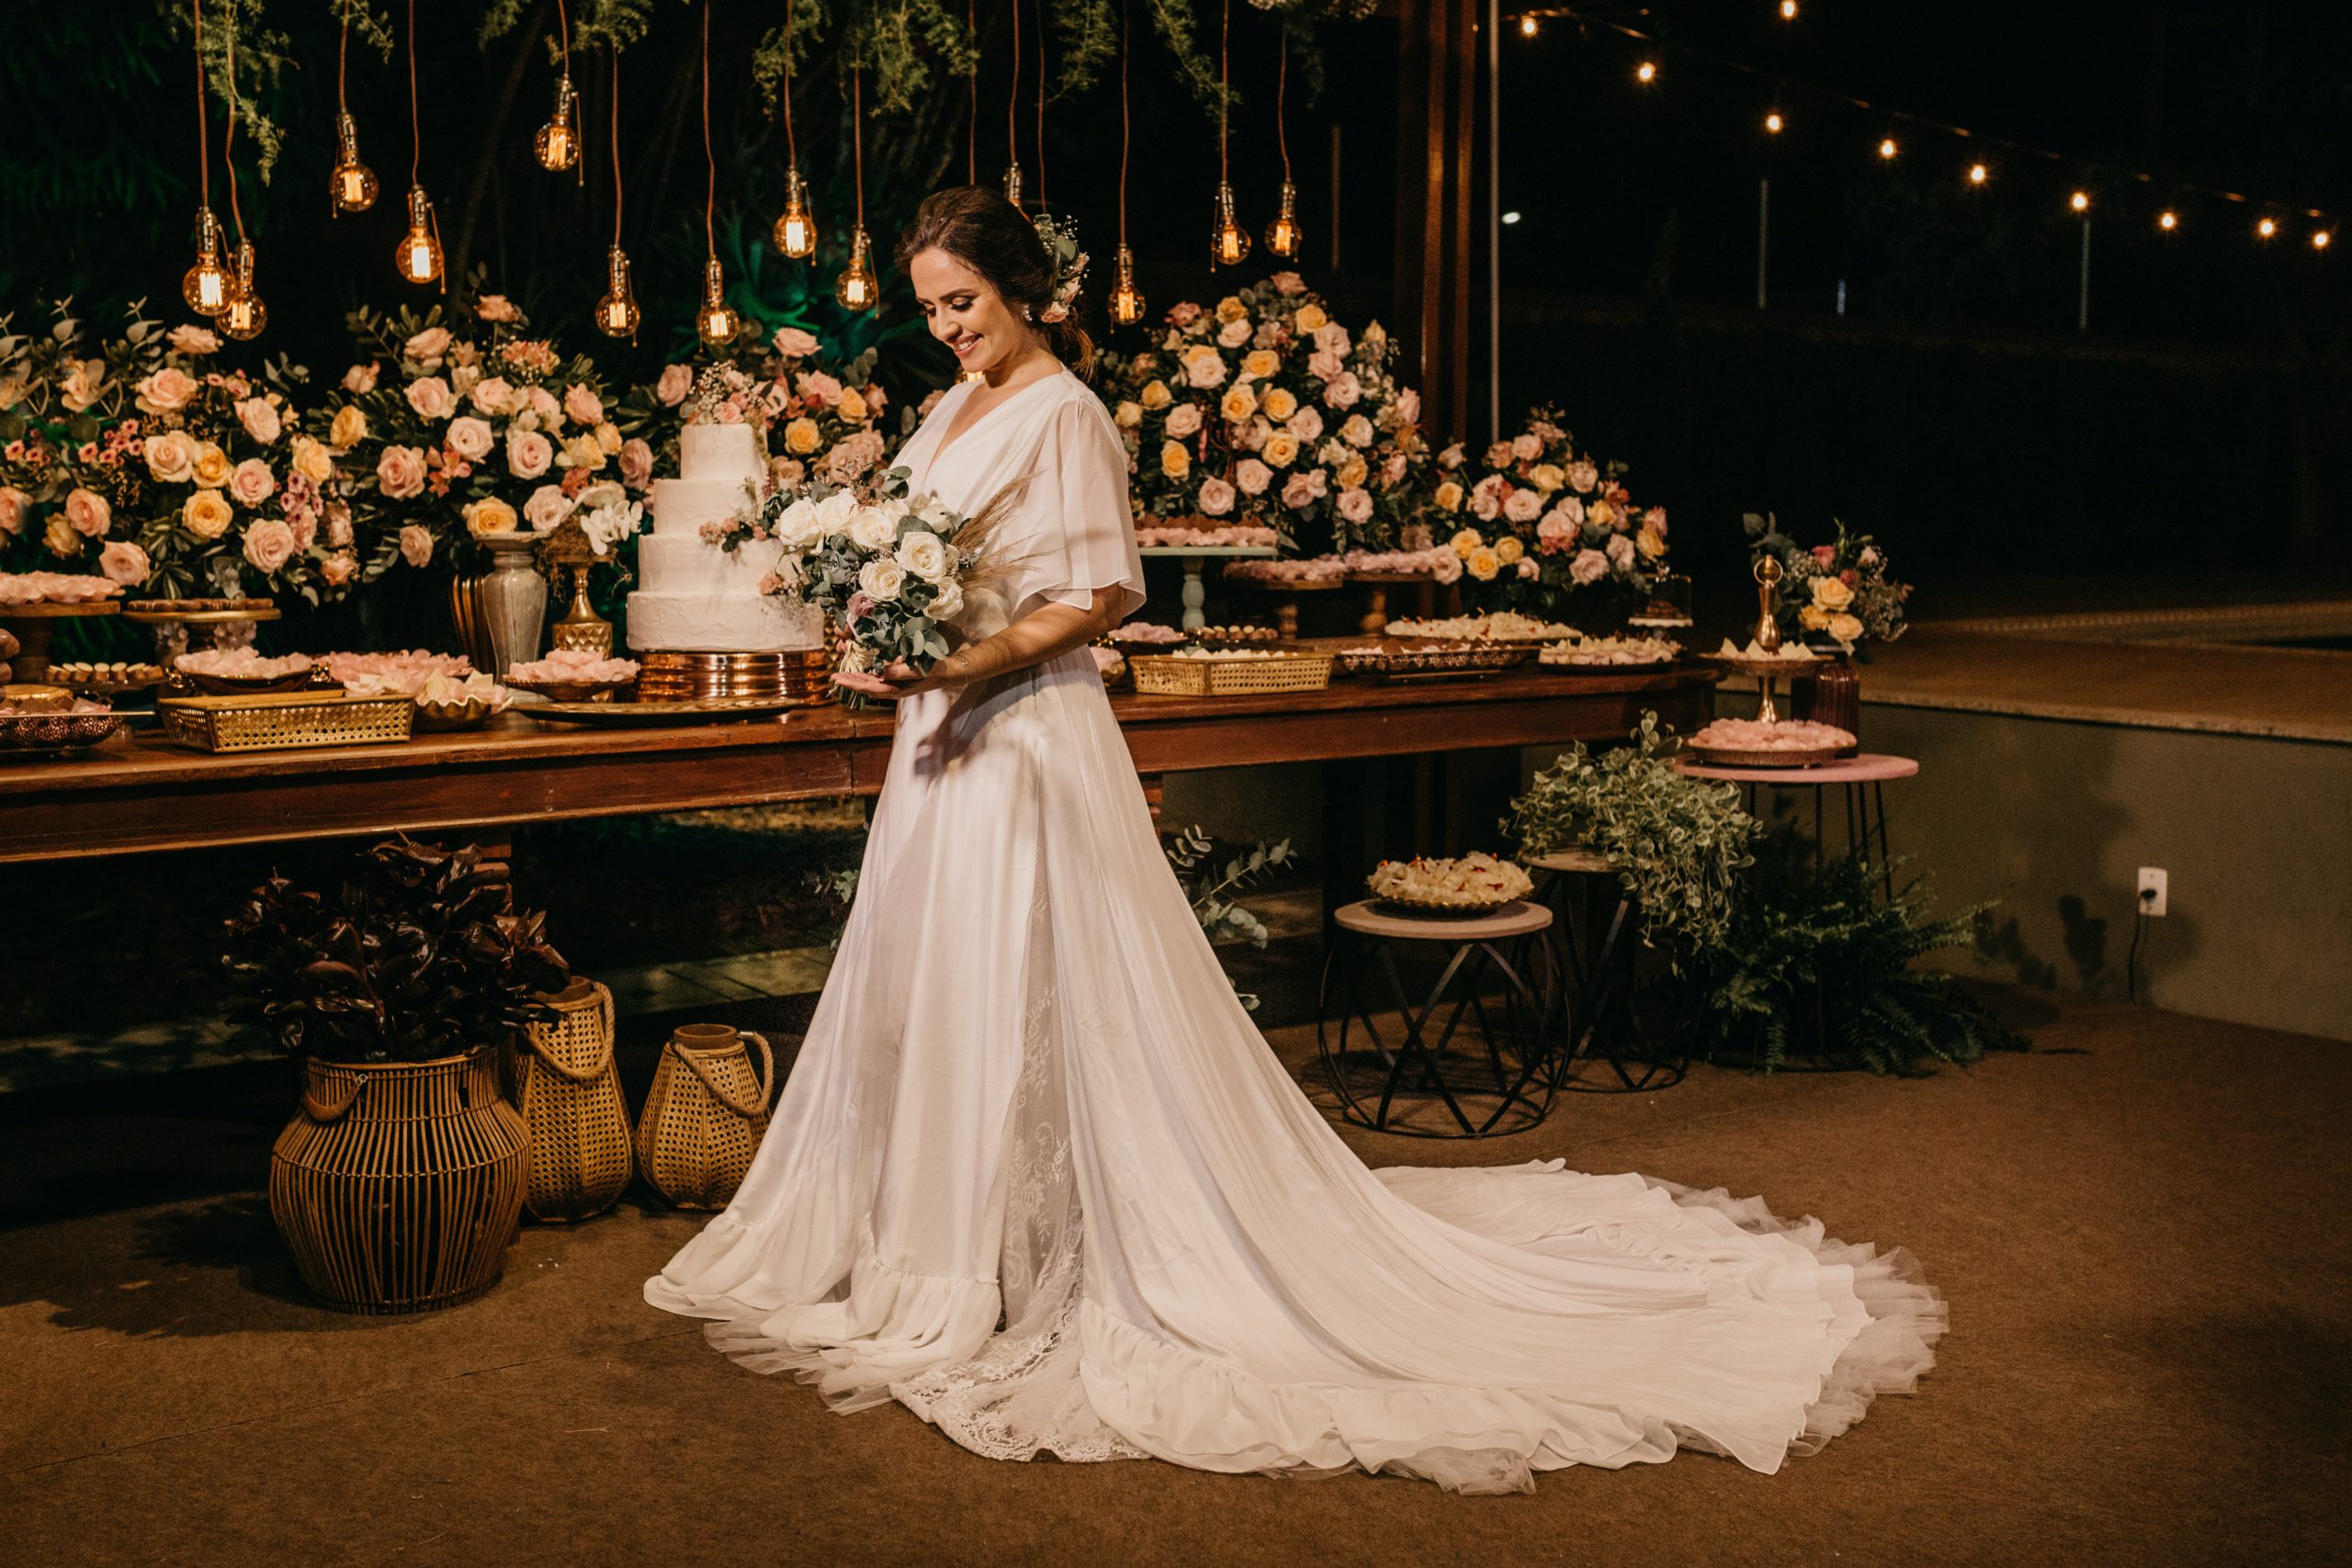 Wedding Dress Heirlooming: Discovering the Special Meaning of It